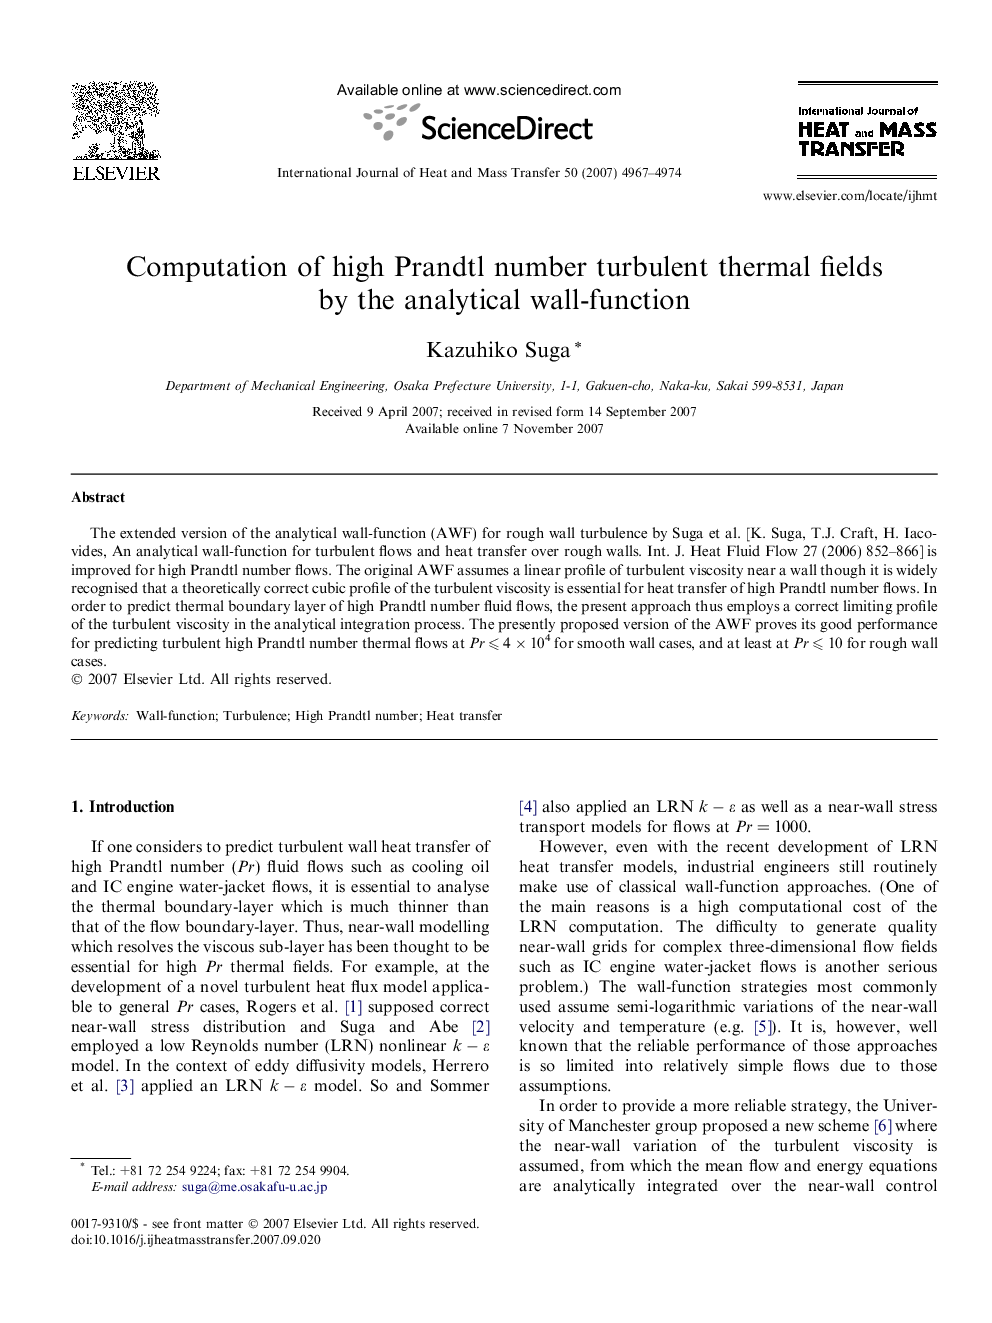 Computation of high Prandtl number turbulent thermal fields by the analytical wall-function